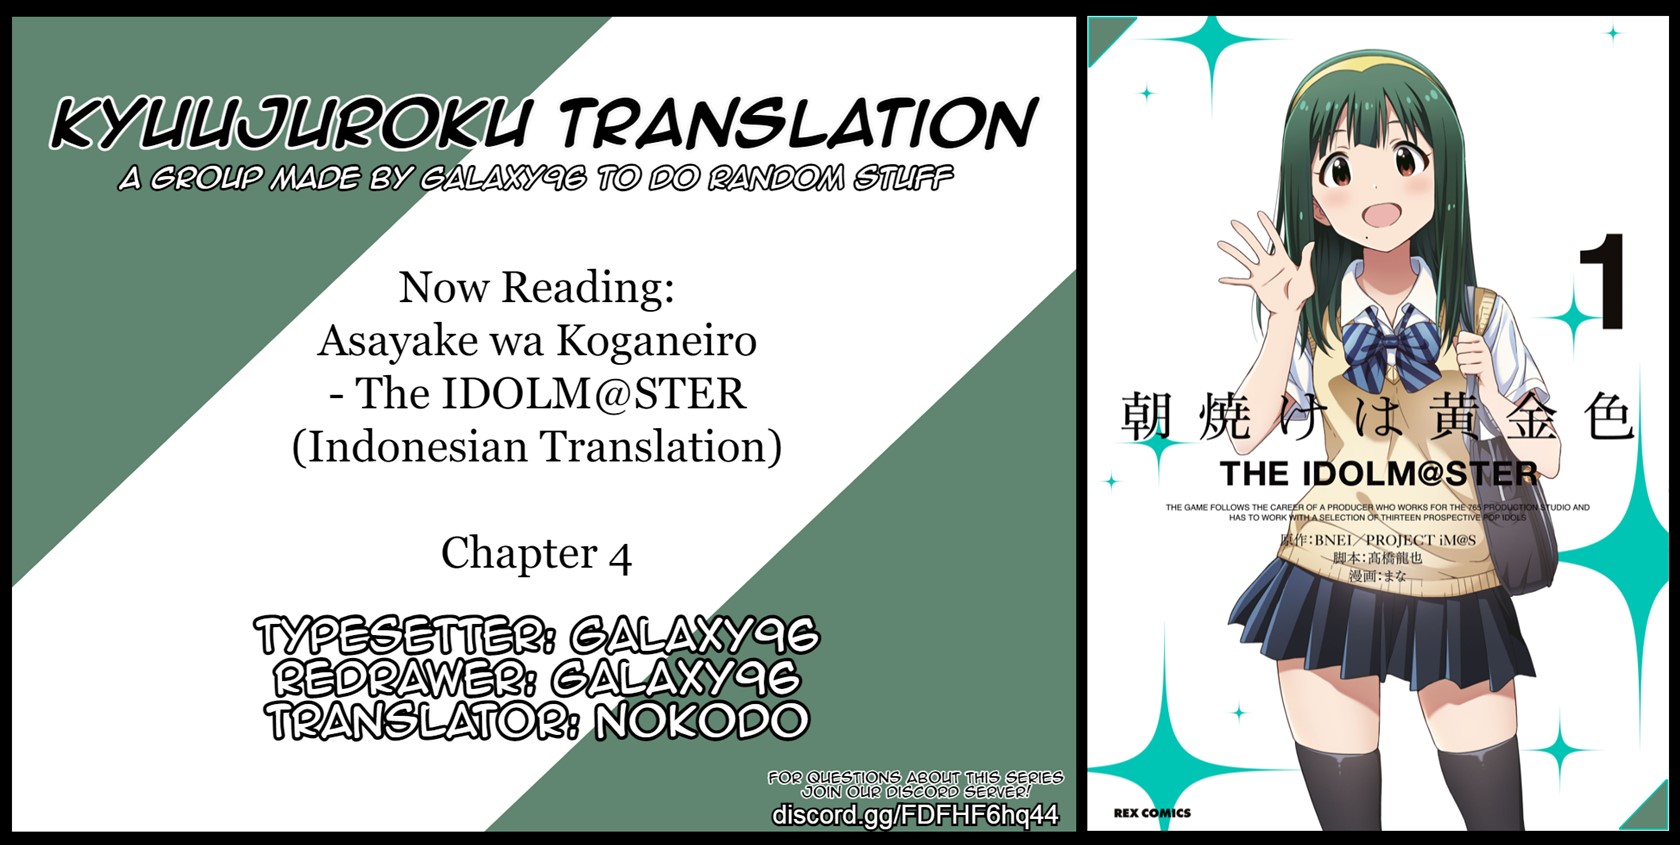 Morning Glow is Golden: The IDOLM@STER Chapter 4